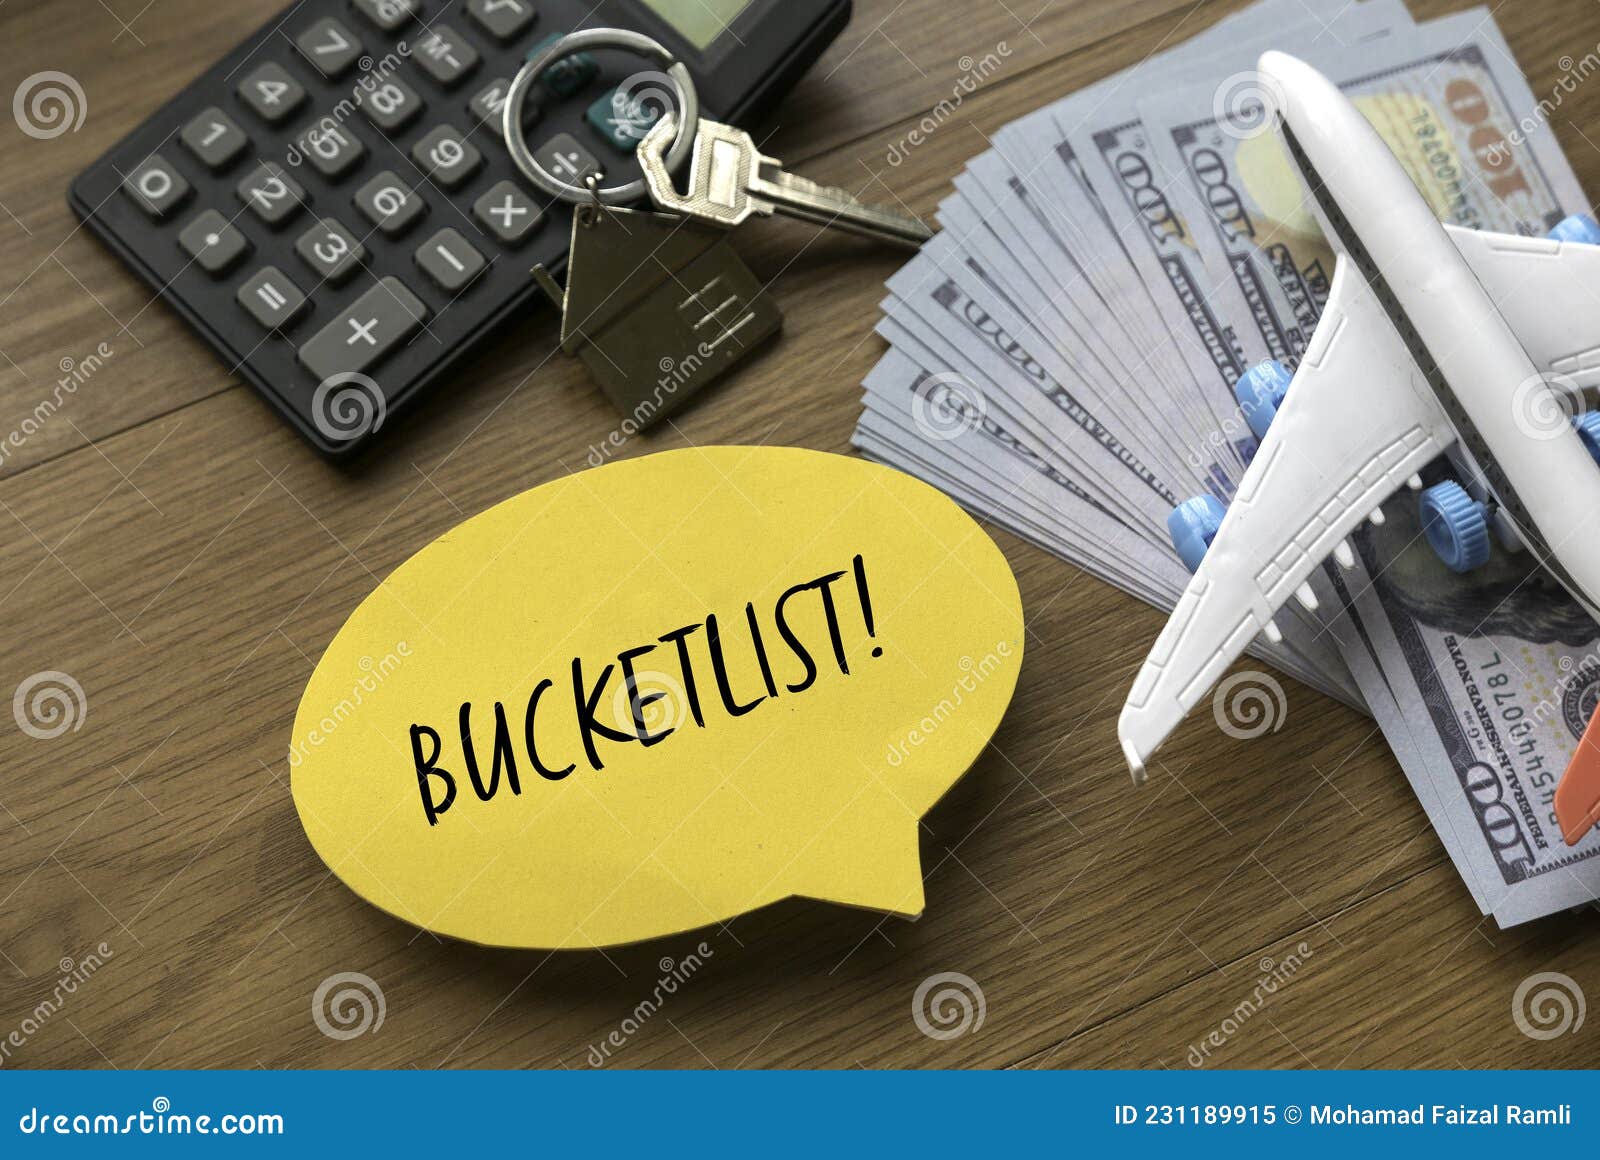 top view of airplane model , money, house key, calculator and yellow speech burble written with bucketlist on wooden background